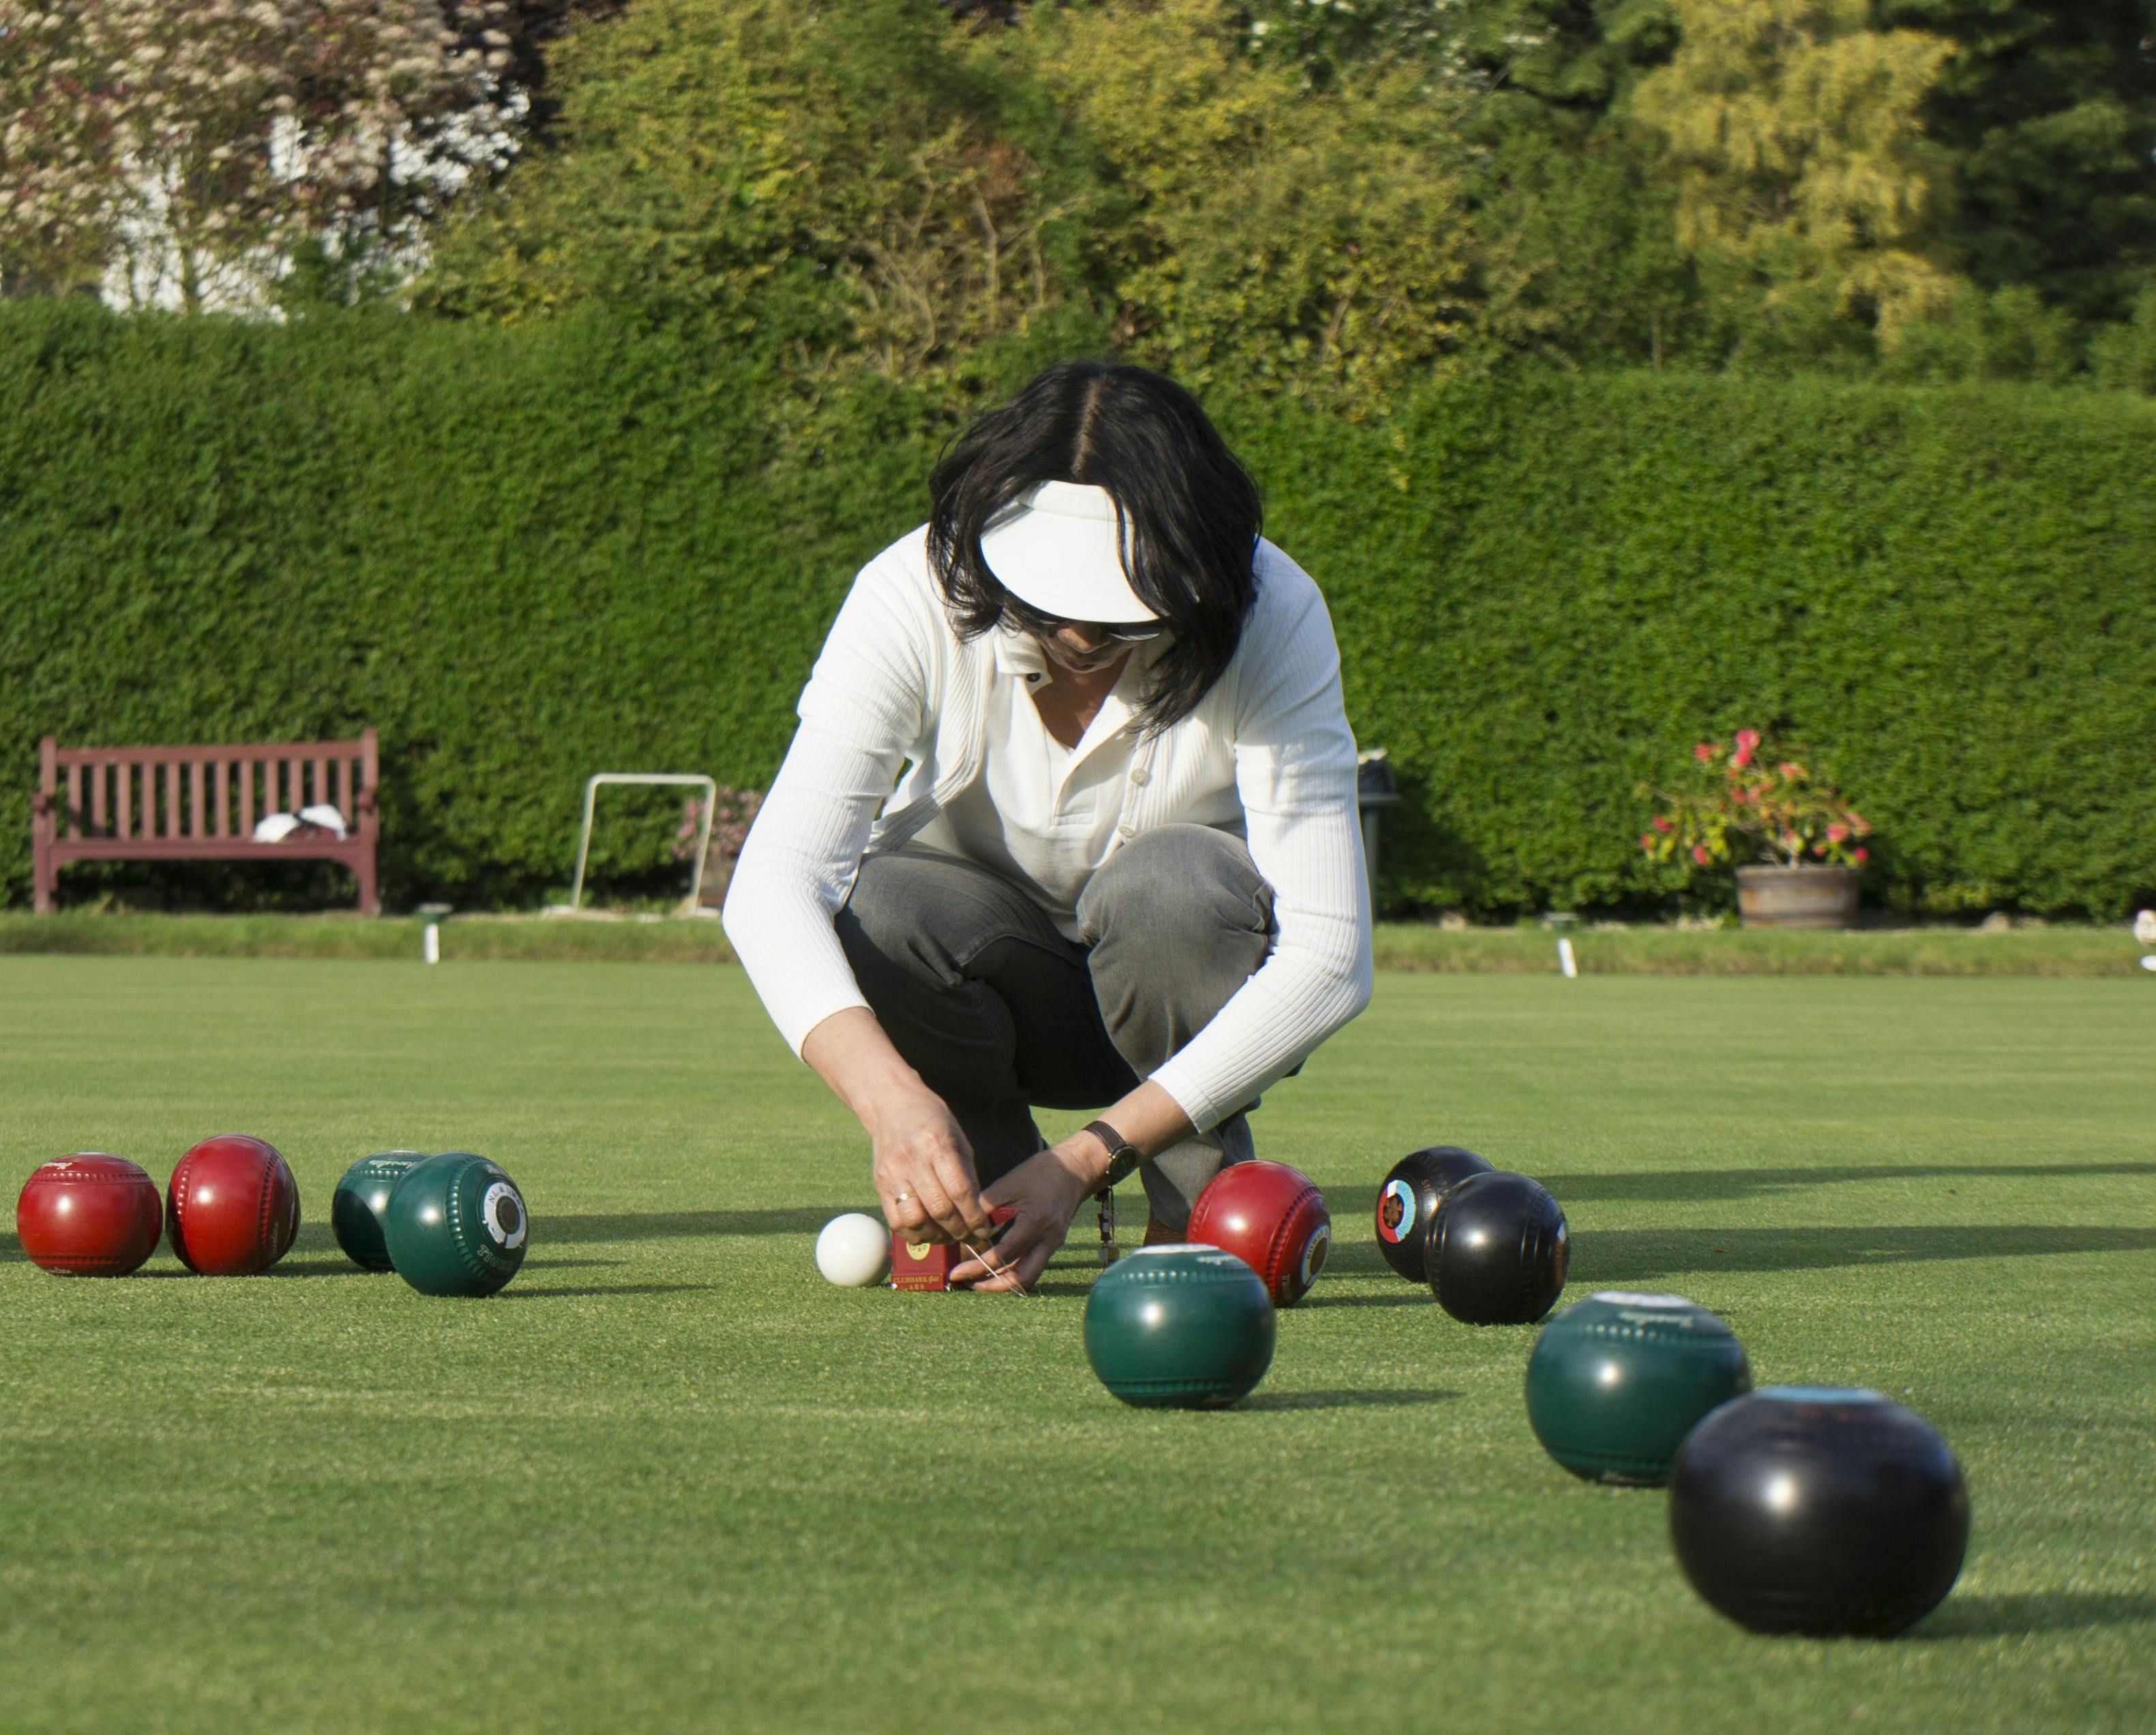 Free stock photo of lawn bowling, measuring bowls